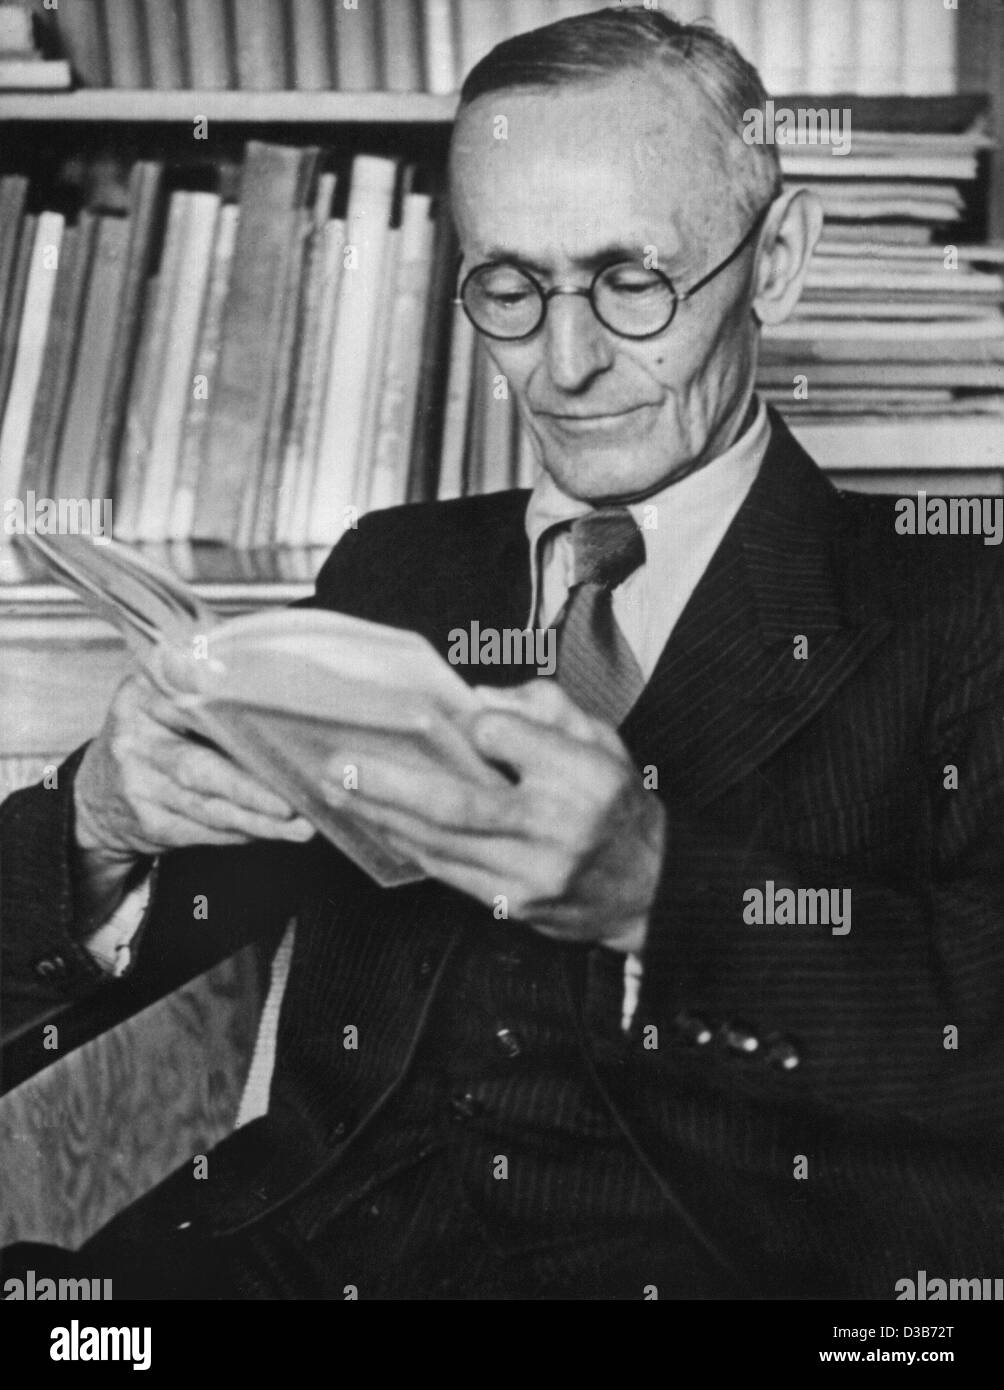 (dpa) - German author and Nobel Prize laureate Hermann Hesse, reading in his study in Montagnola, Switzerland (undated filer). Hesse was born in Calw, Germany, 2 July 1877, and died in Montagnola, 9 August 1962. The year 2002 marks the anniversary of the author's 125th birthday. Hesse achieved inter Stock Photo